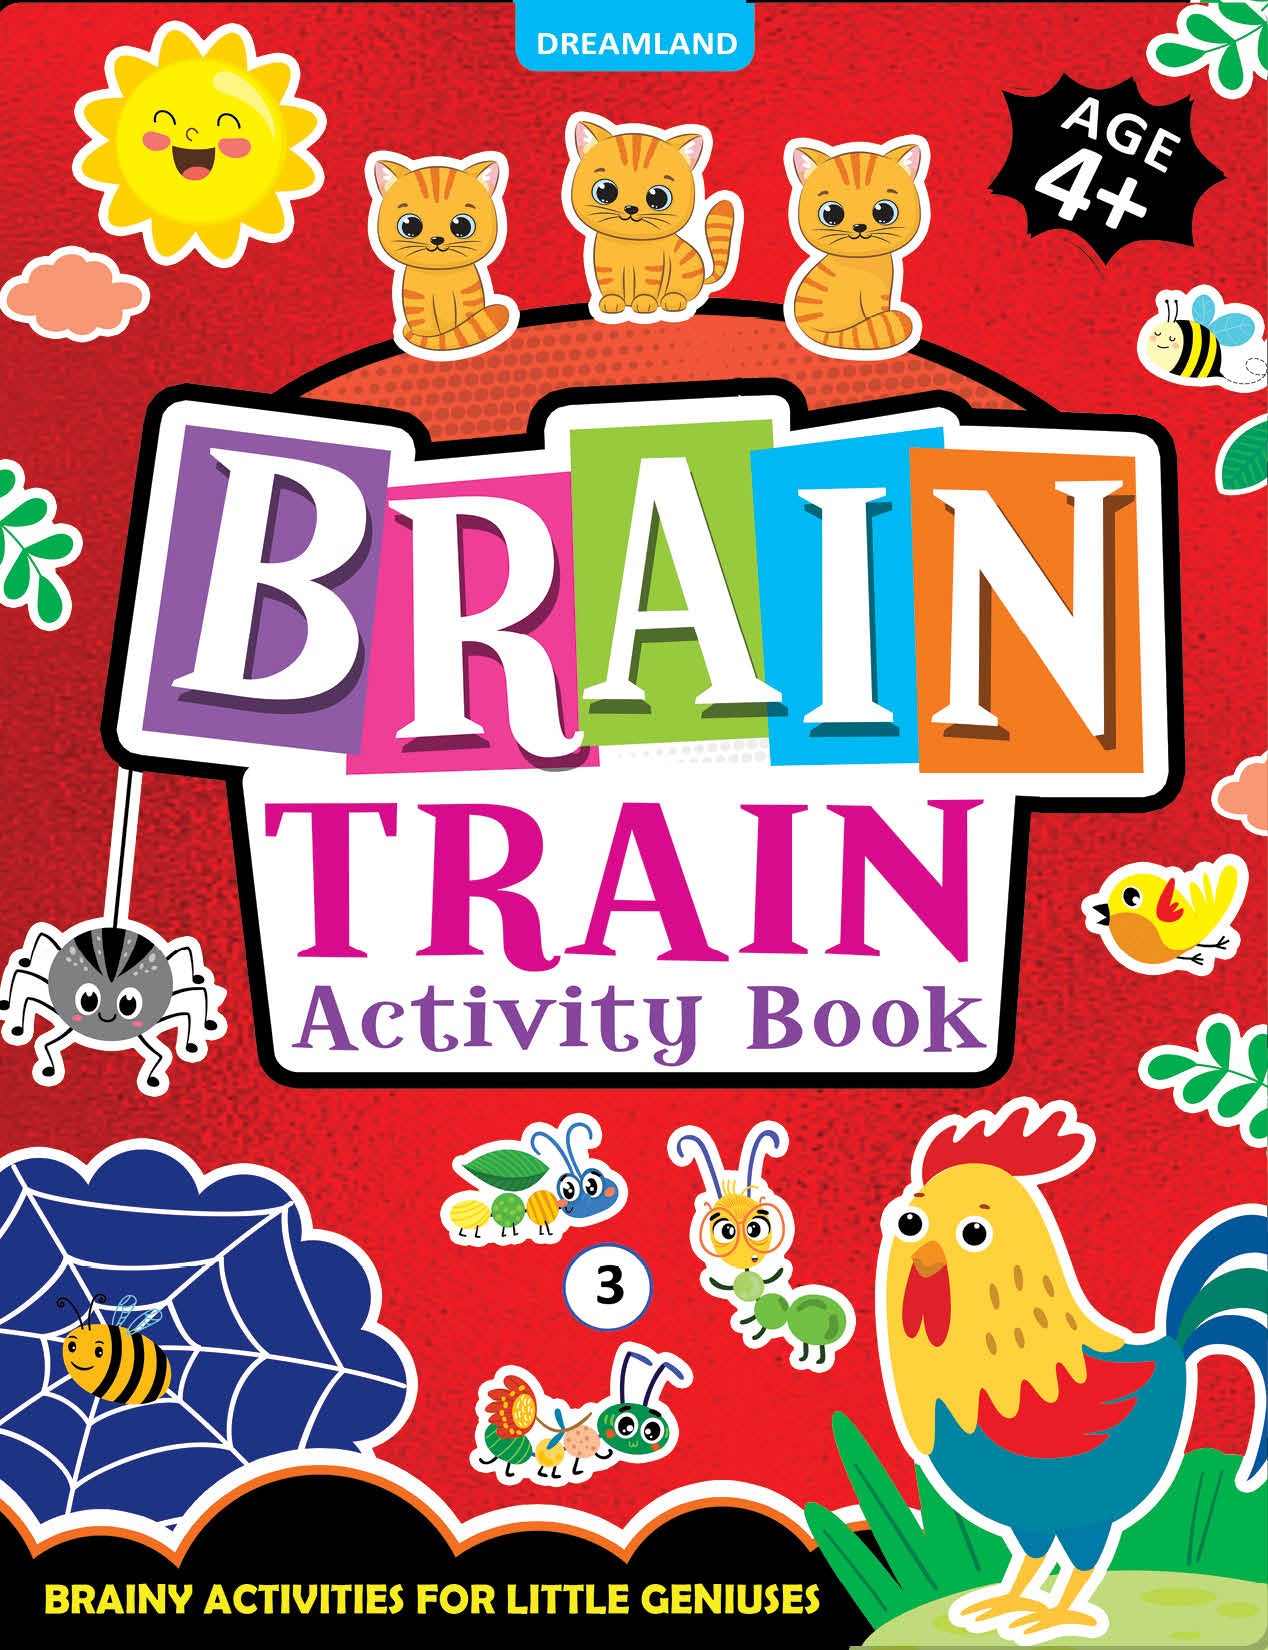 Brain Train Activity Book for Kids Age 4+ – With Colouring Pages, Mazes, Puzzles and Word searches Activities